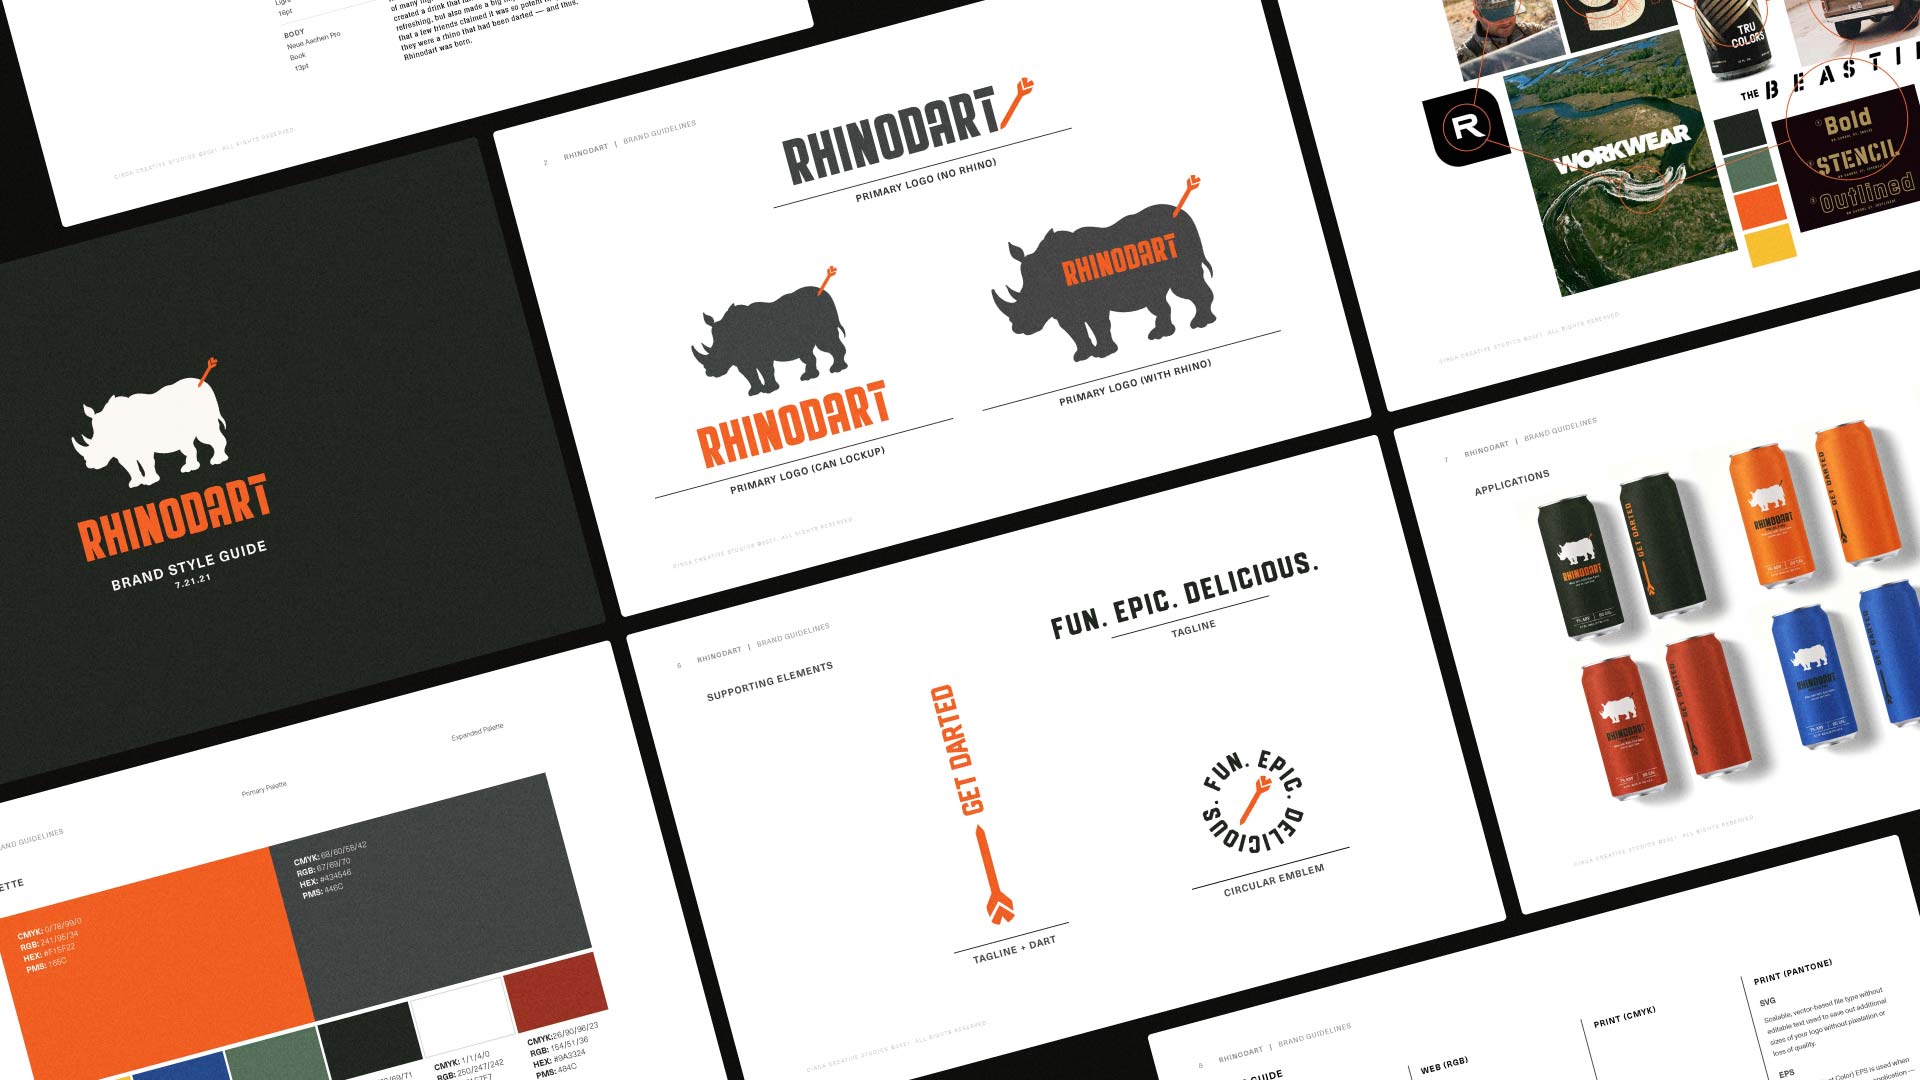 Grid of pages from the Rhinodart brand guide